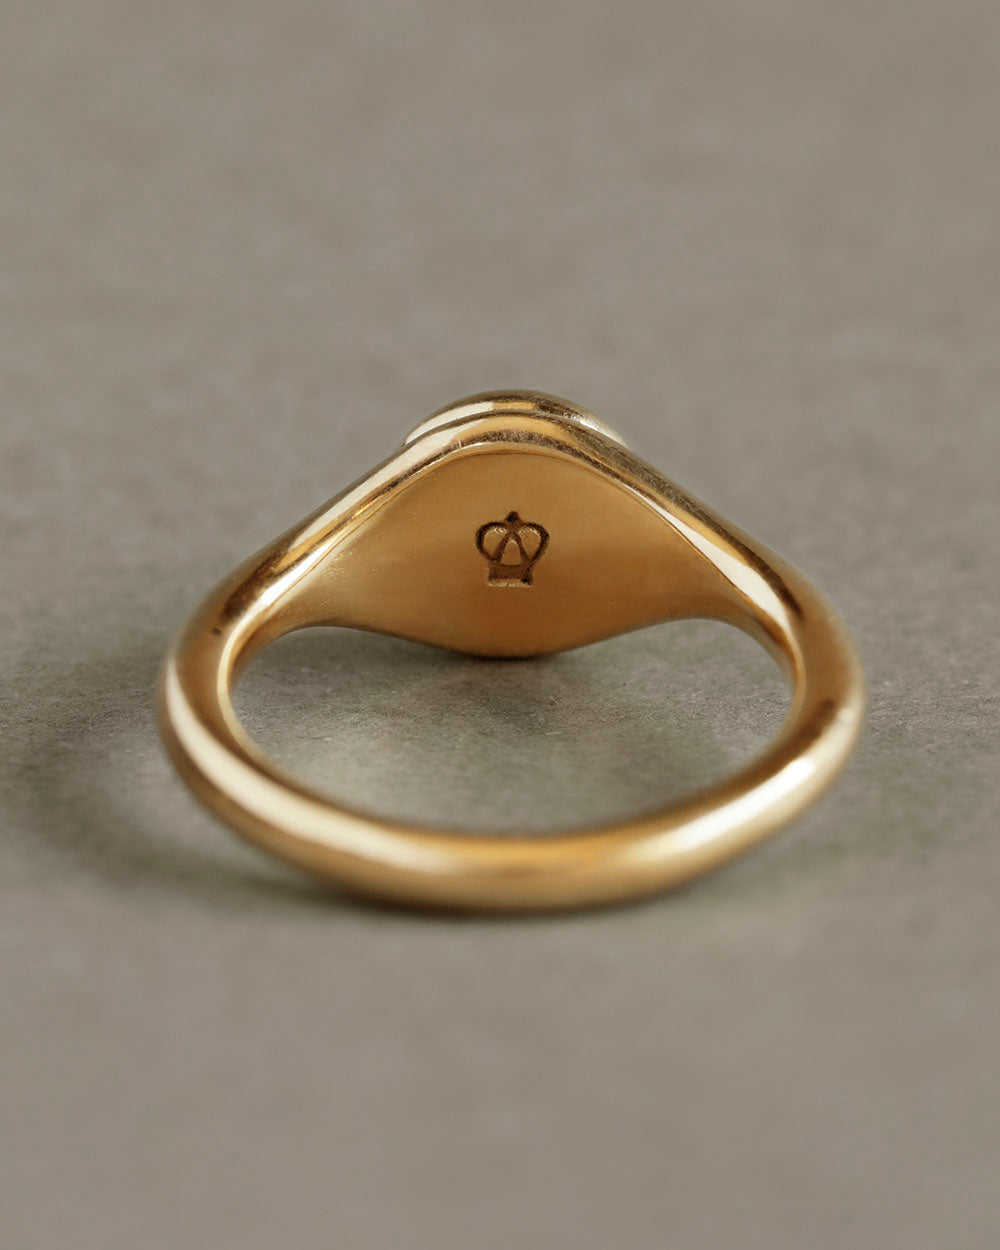 Solid 18k yellow gold band with soft button circle atop elegant signet style ring